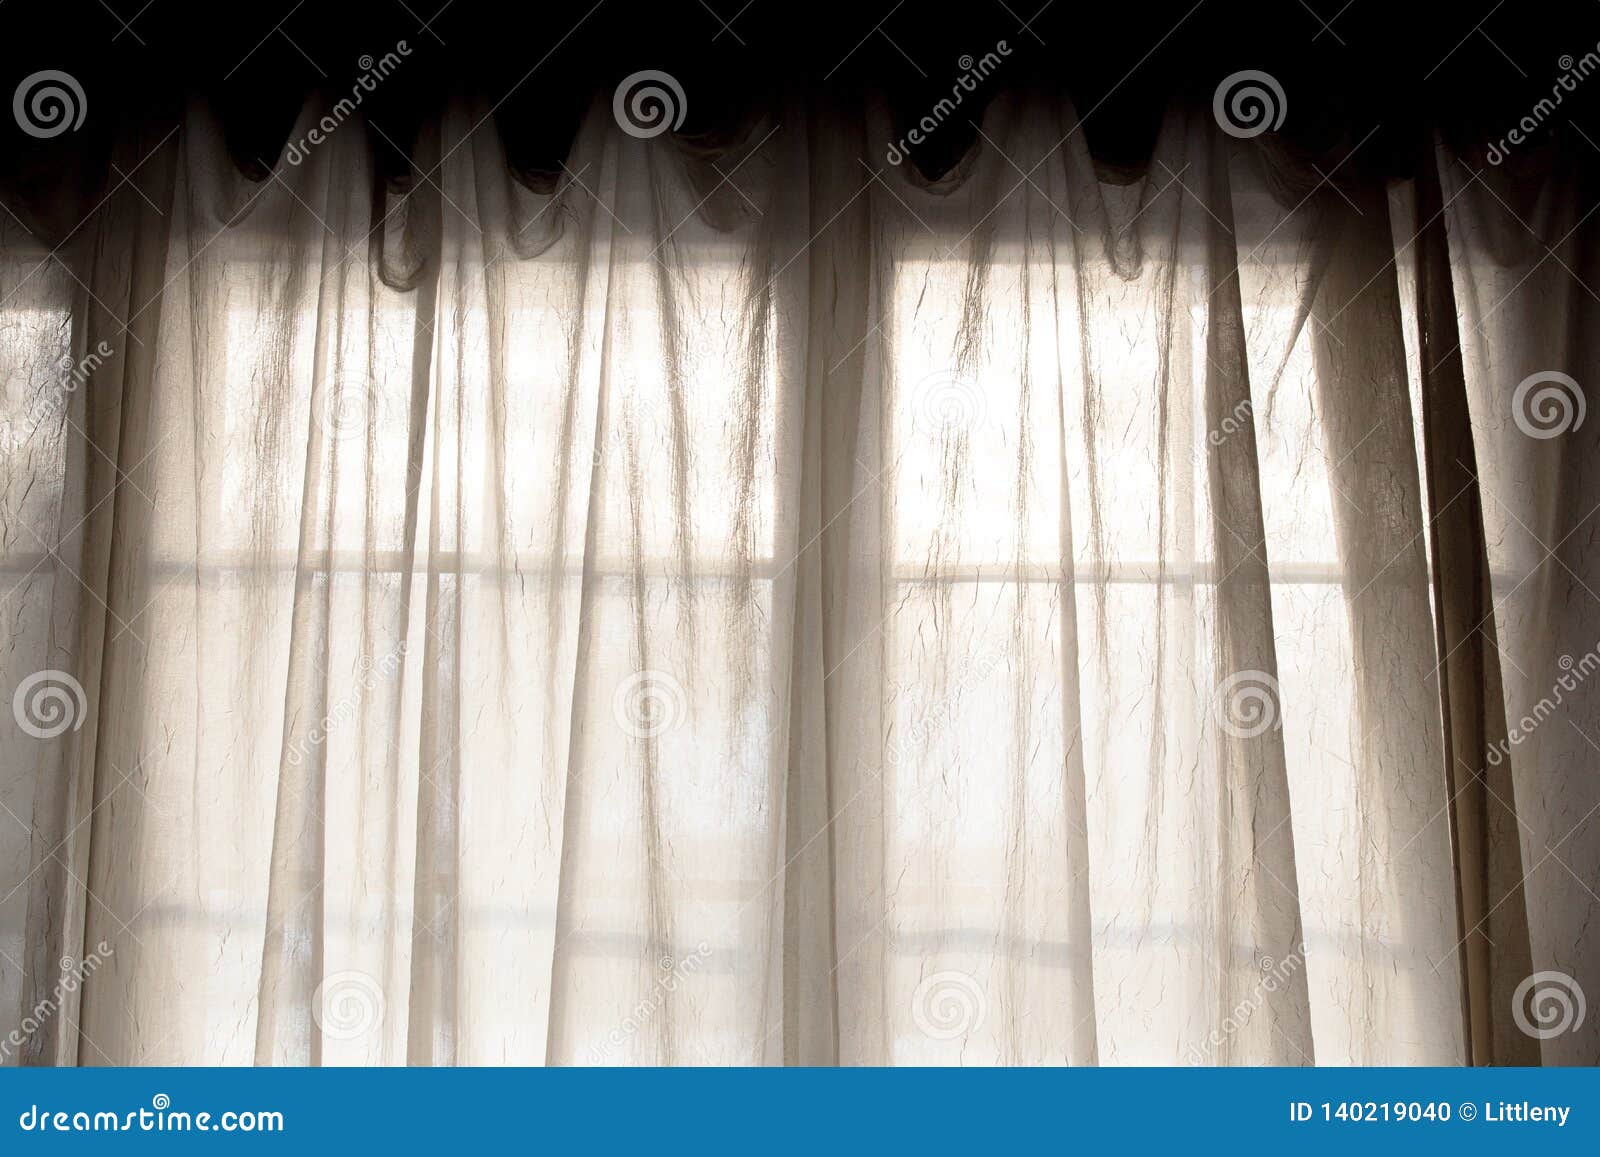 sheer fabric window curtain with filtered light